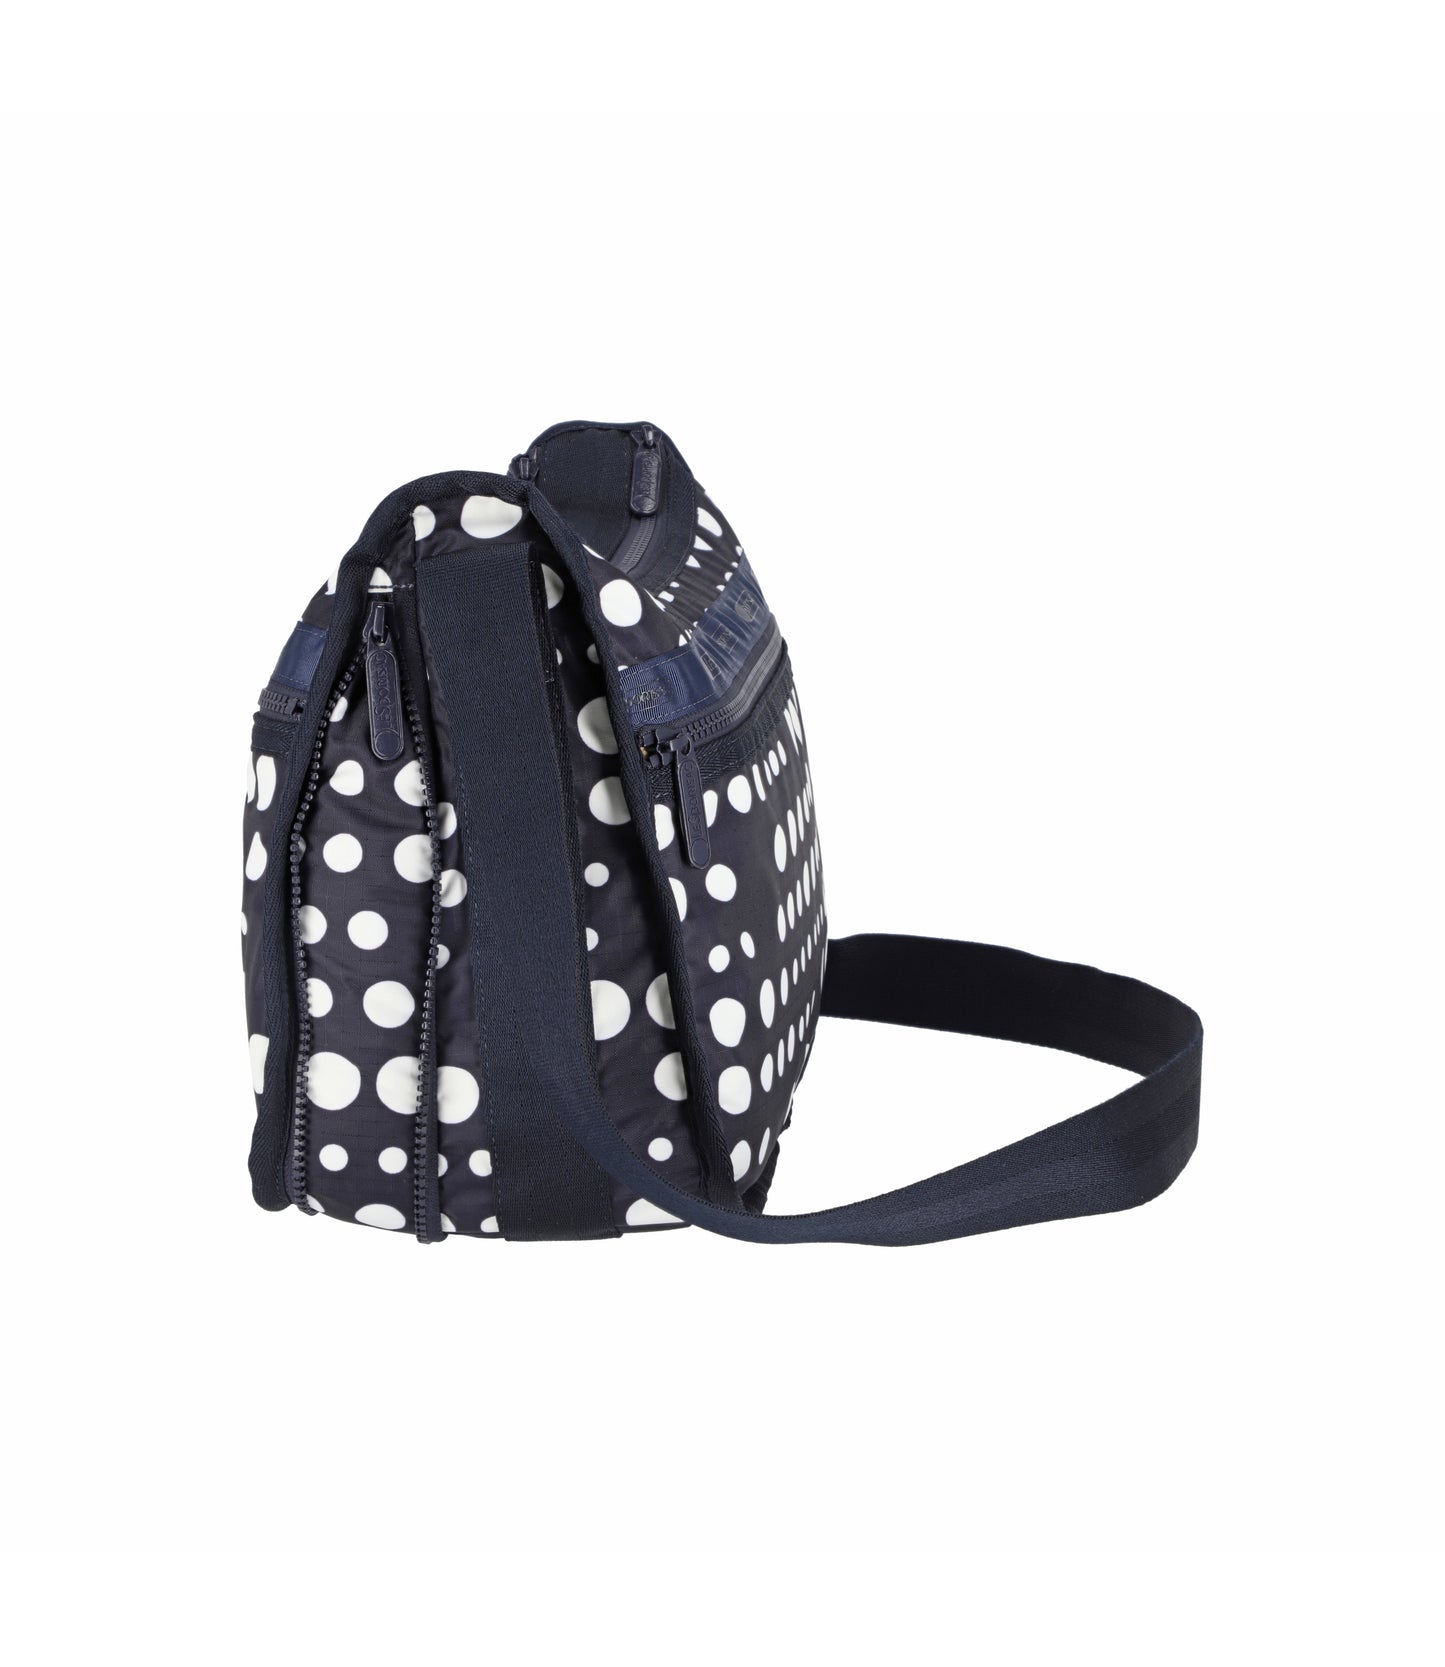 Deluxe Everyday Bag<br>LeSportsac x Libertine Dots Deluxe